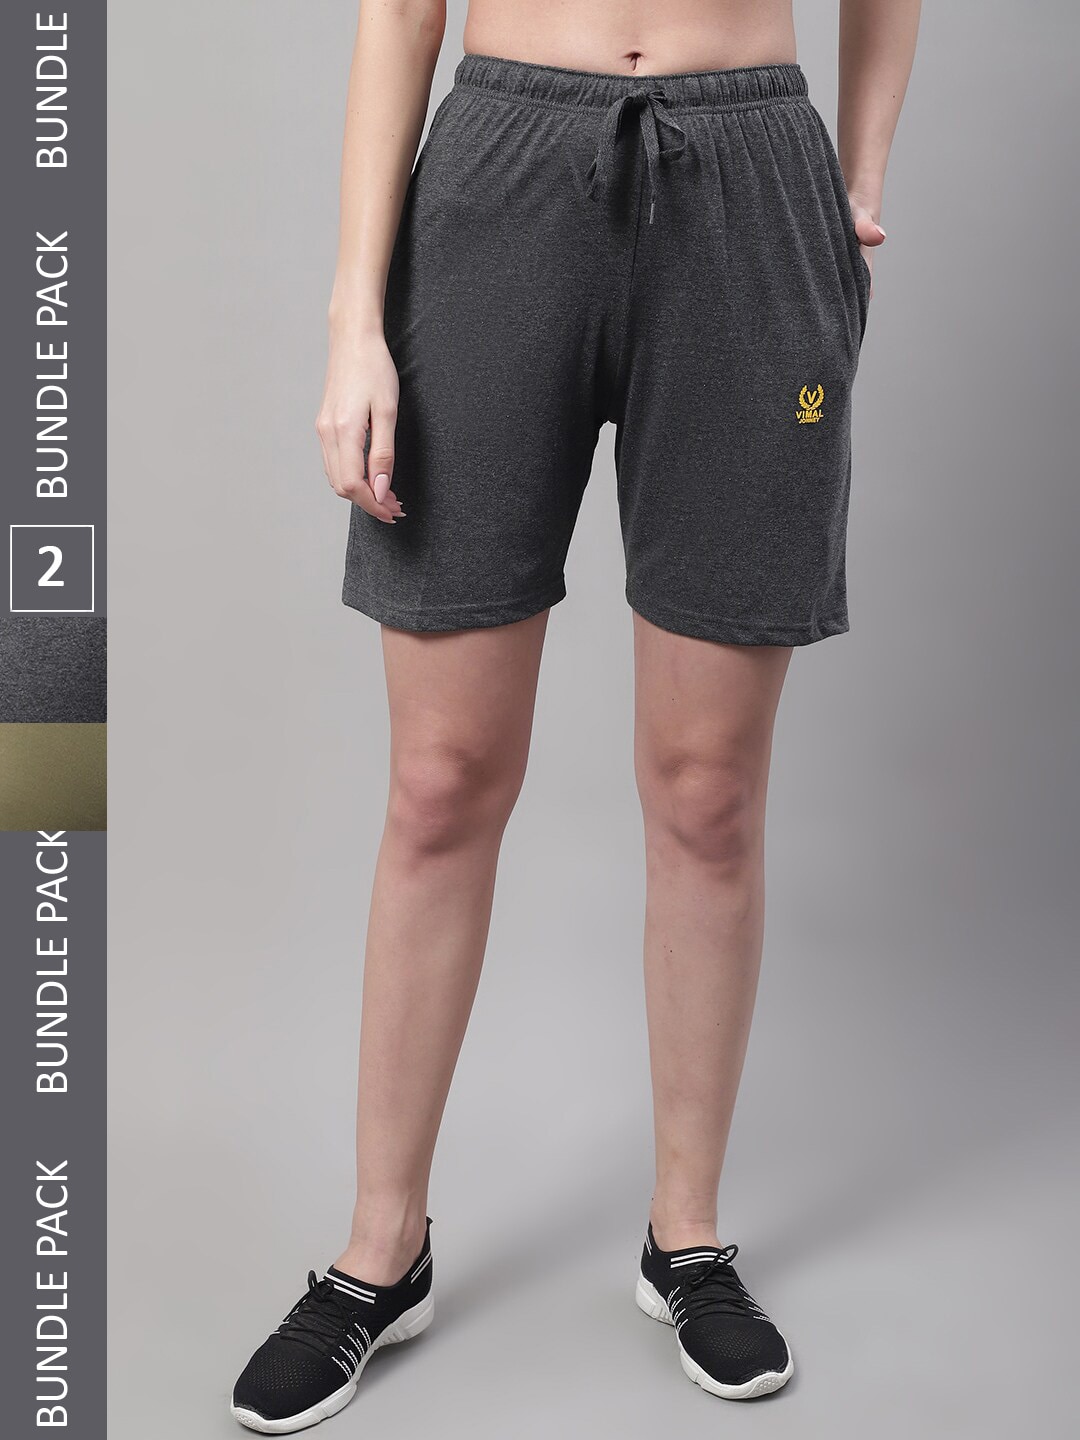 VIMAL JONNEY Women Pack Of 2 Cotton Sports Shorts Price in India